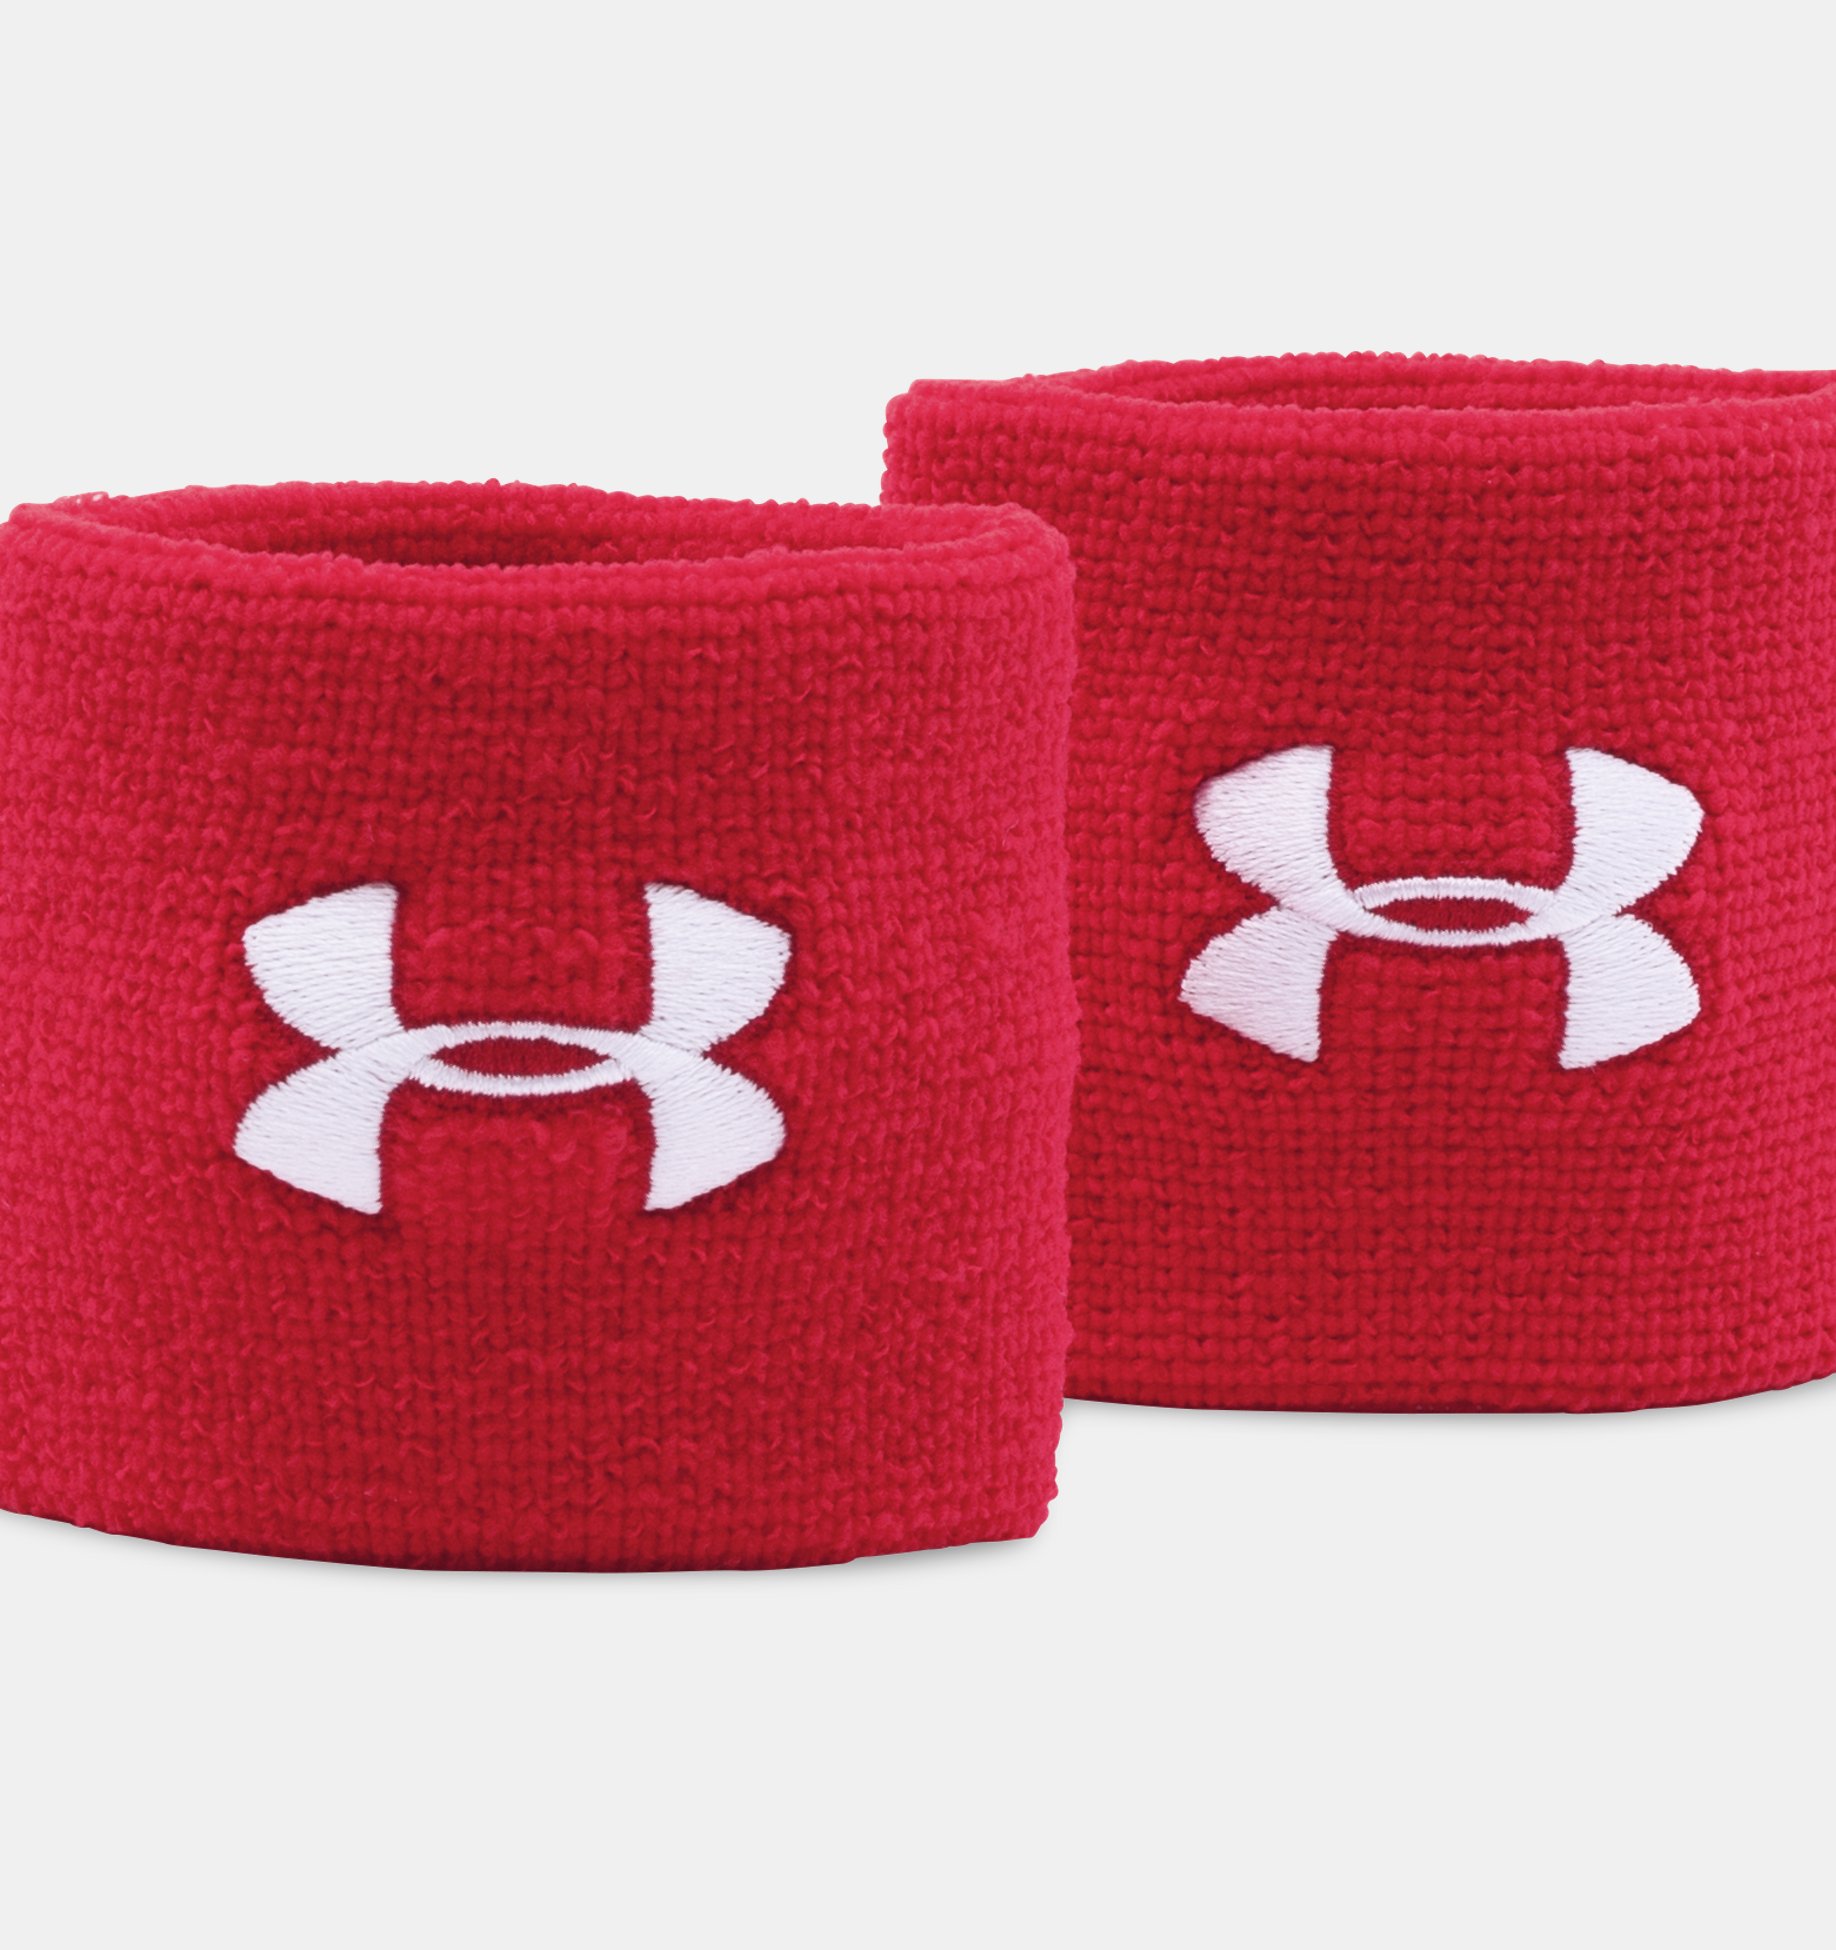 Men's Wristband - 2-Pack | Under Armour